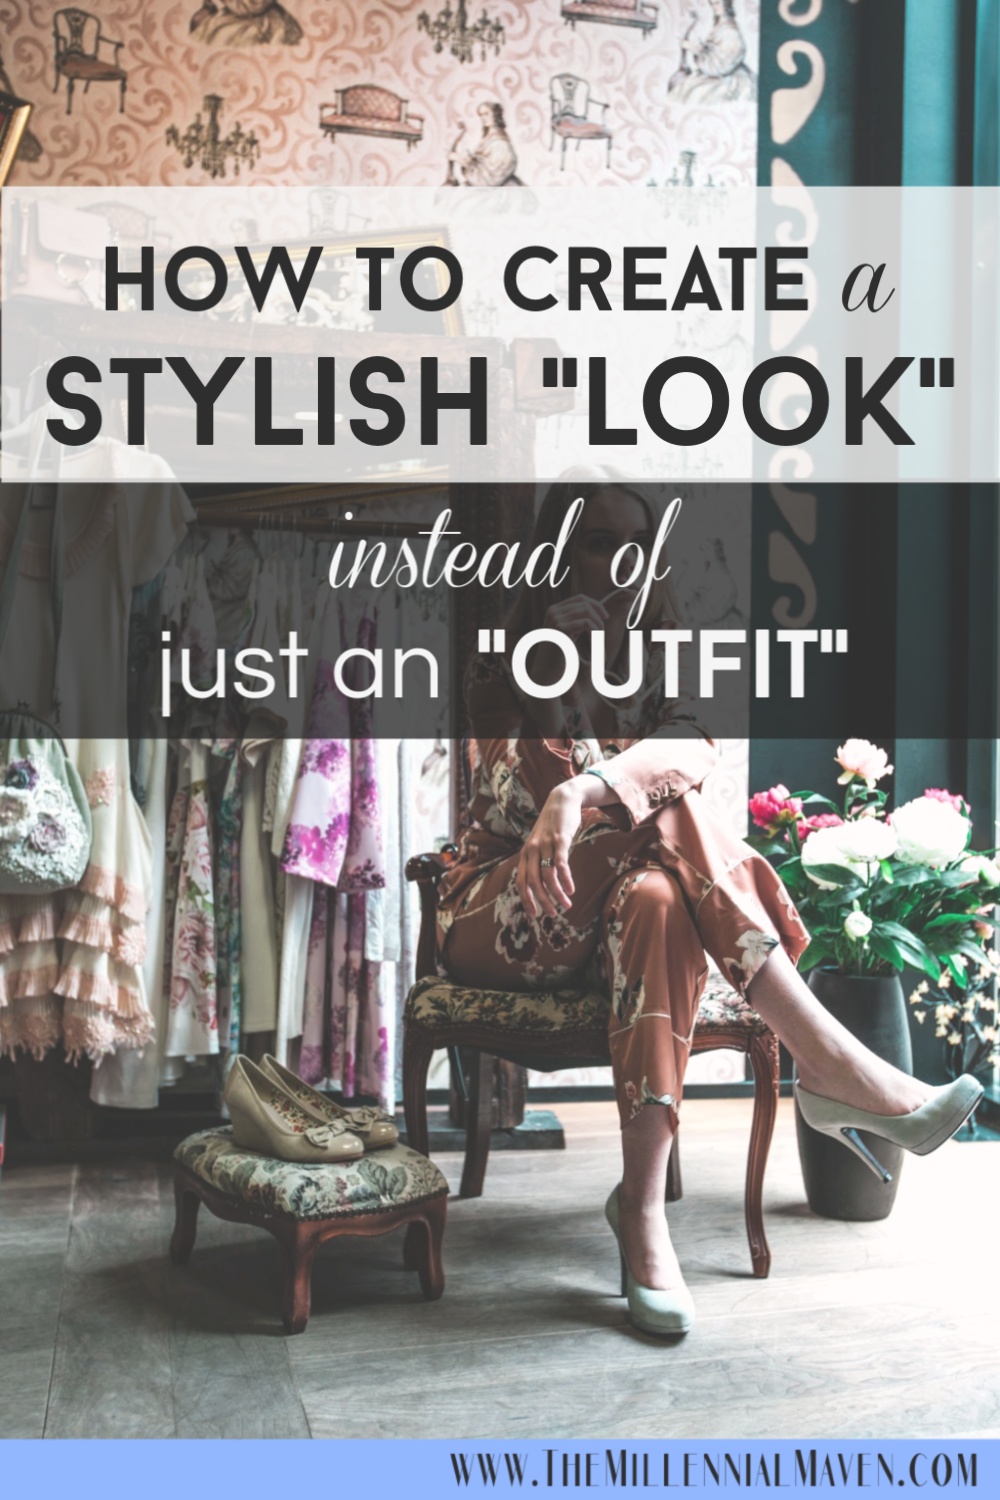 How to Look Stylish Every Day